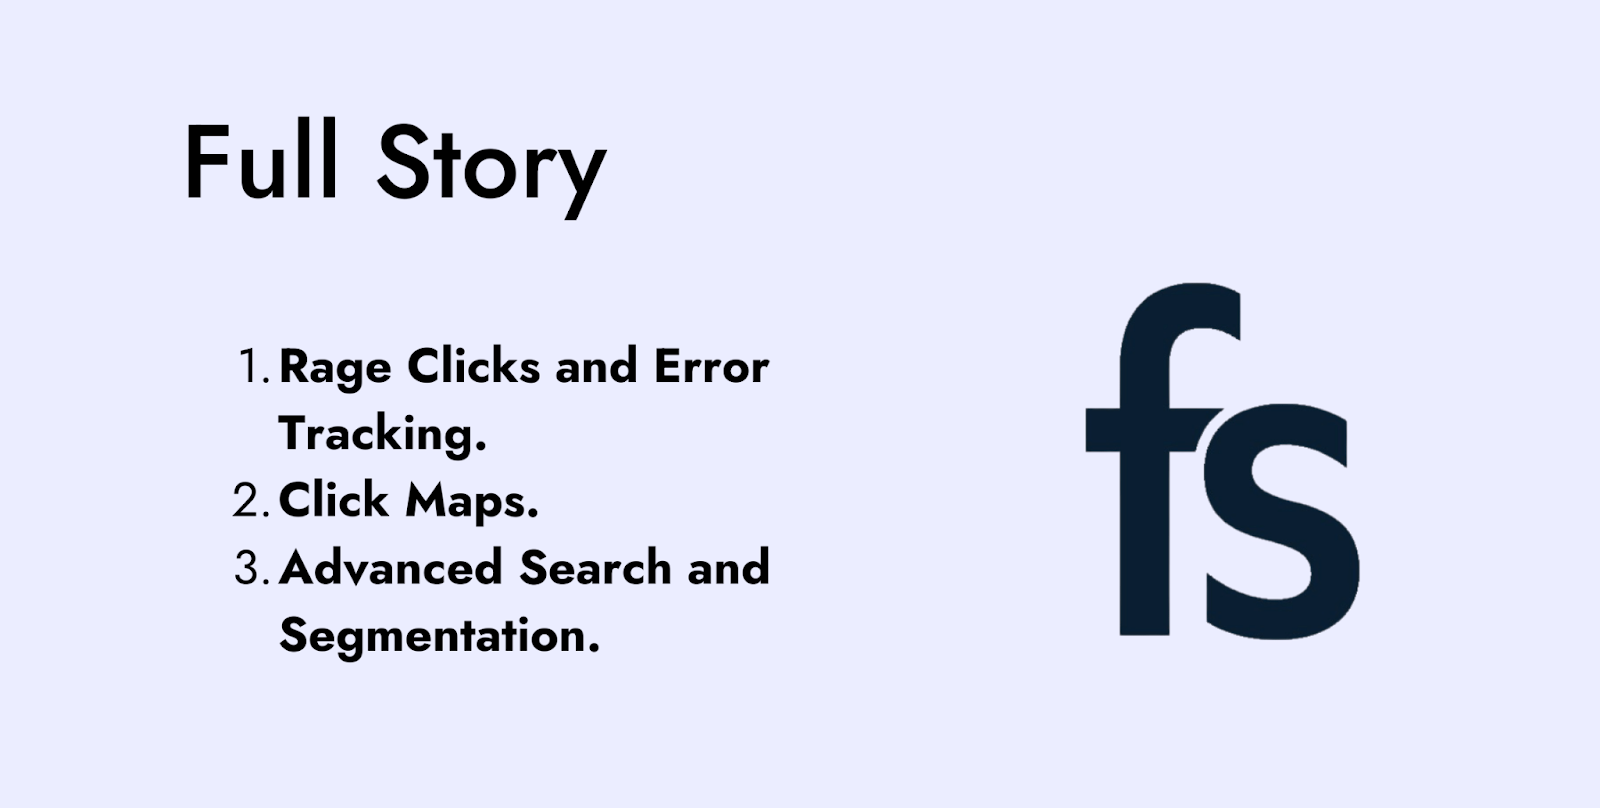 Features of Full Story (Top CRO Tool)